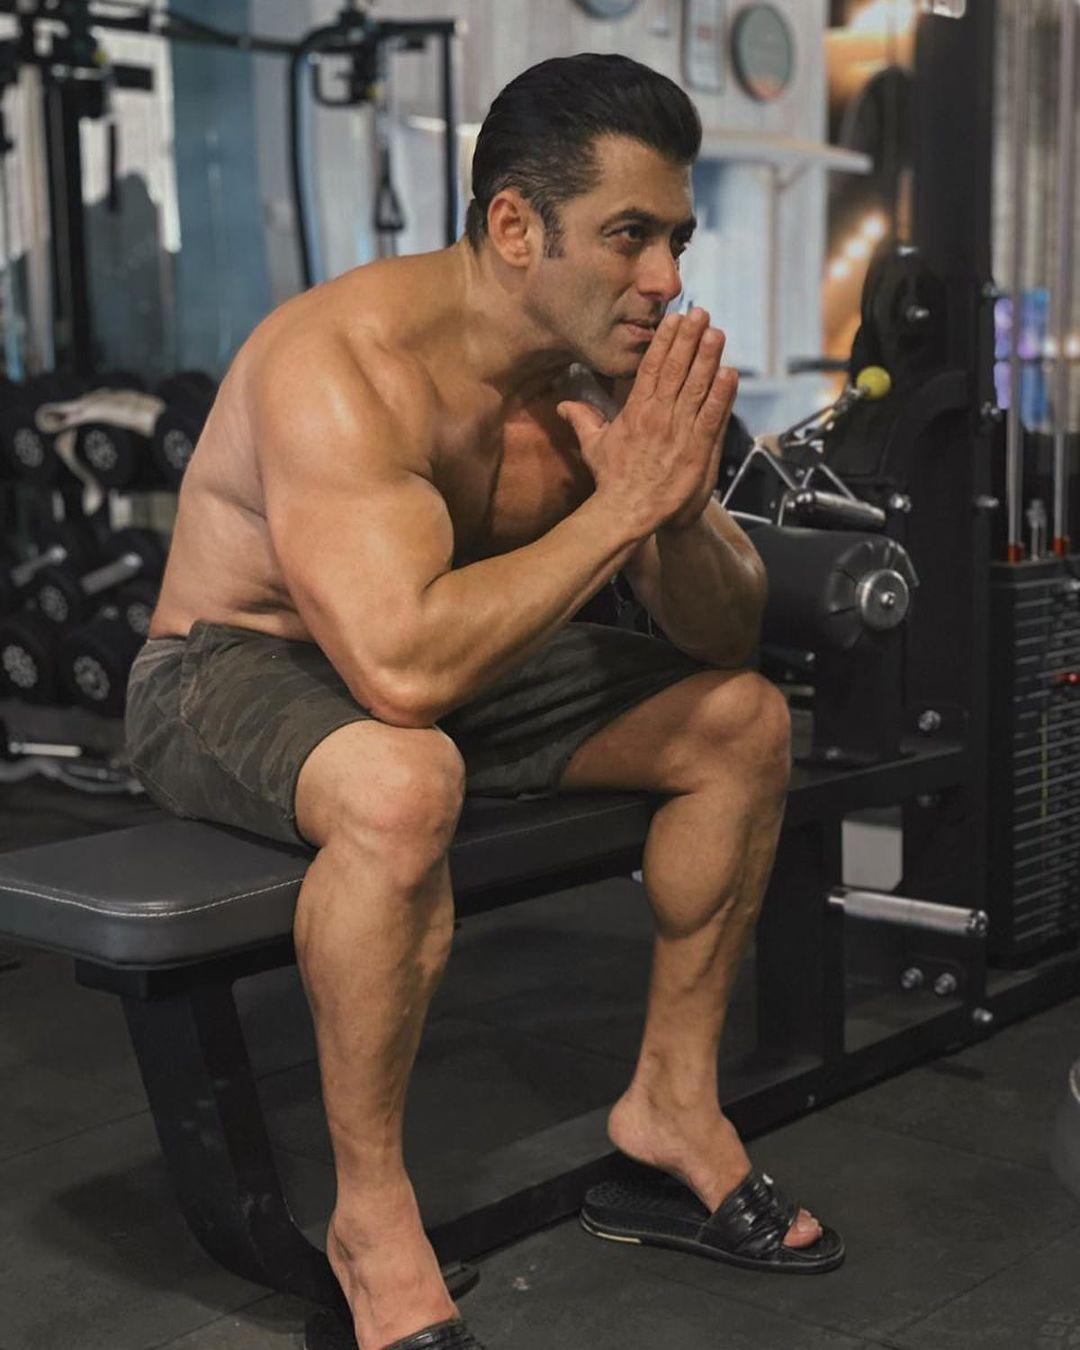 Weight Training: Salman Khan focuses on weight training like a bird focused on its prey. The purpose of weight training is to build muscle mass and increase strength, which is why it gets major TLC from Salman Khan